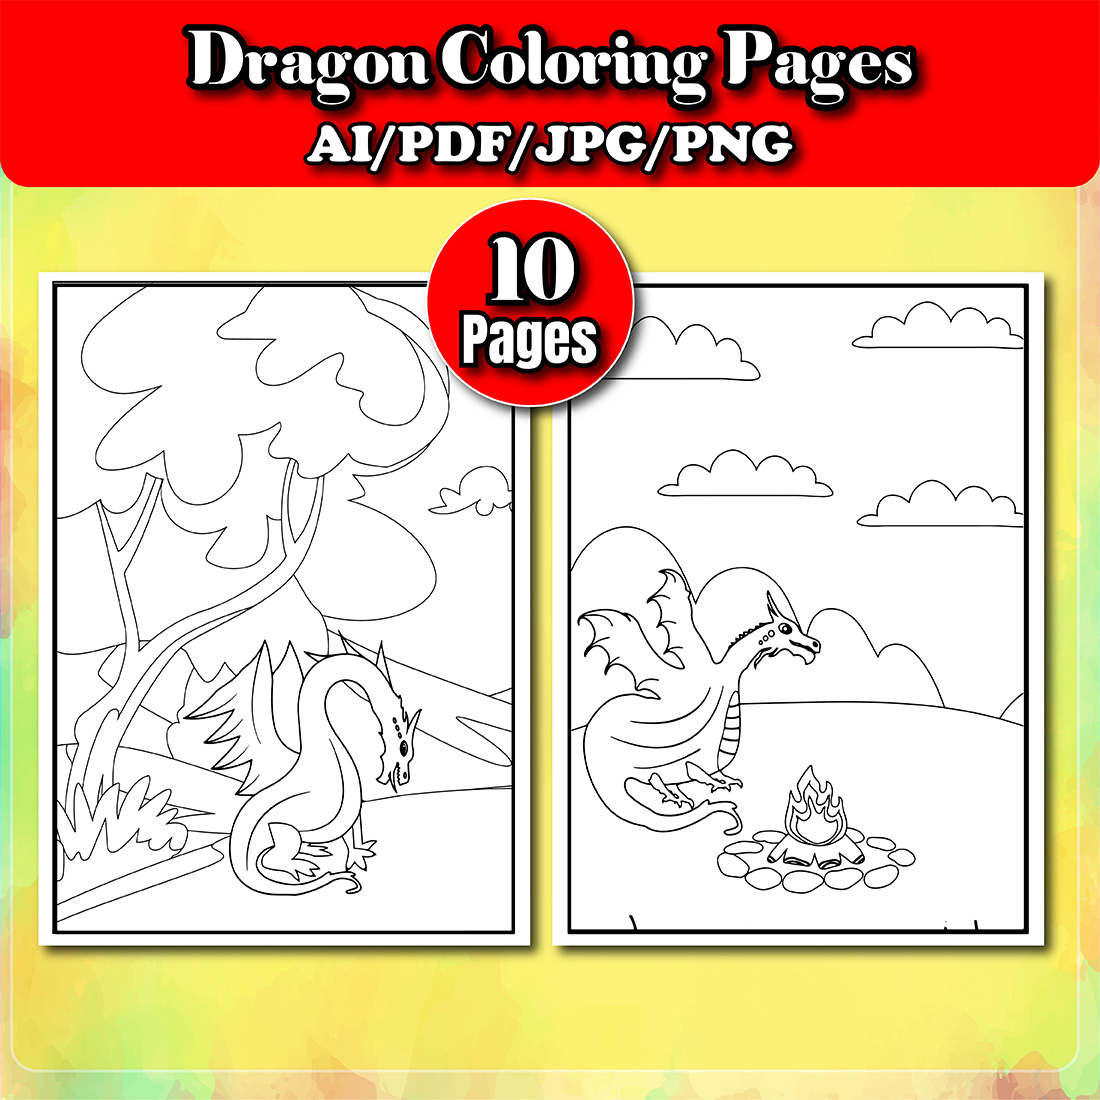 preview image Dragon Coloring Pages.